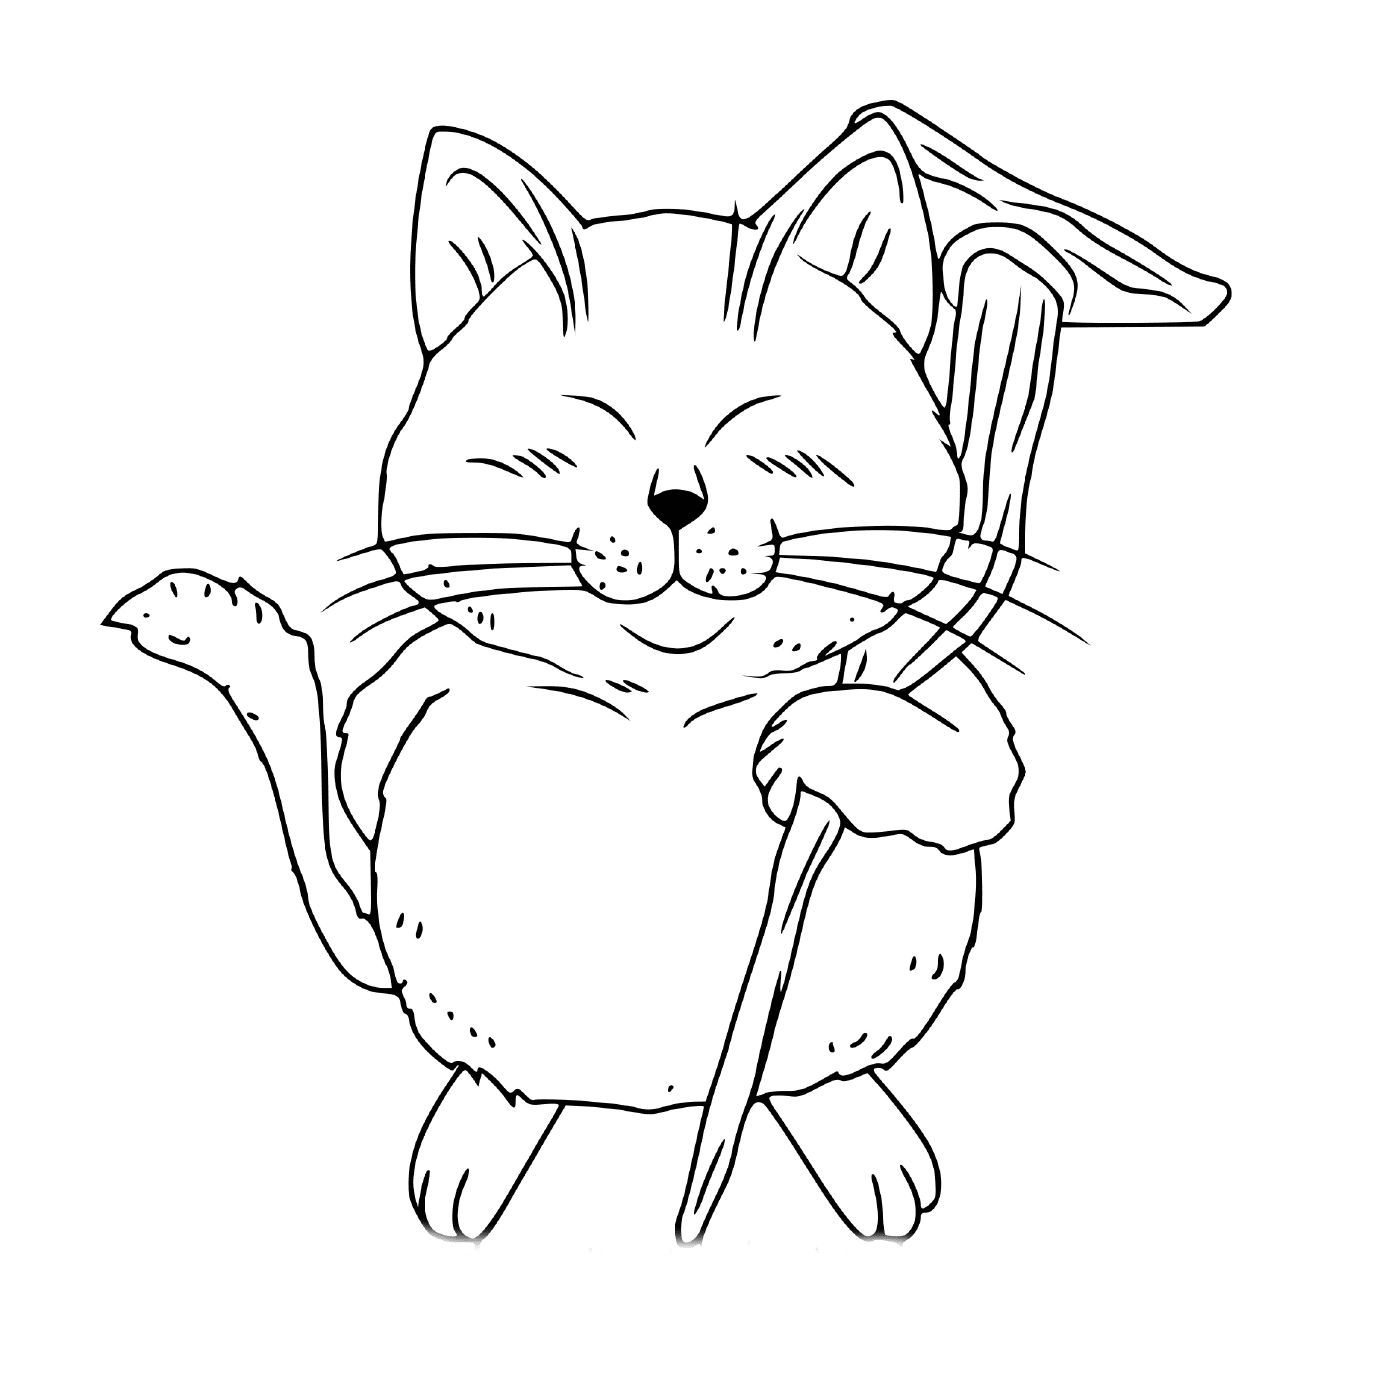  Karin, a cat holding a fork 